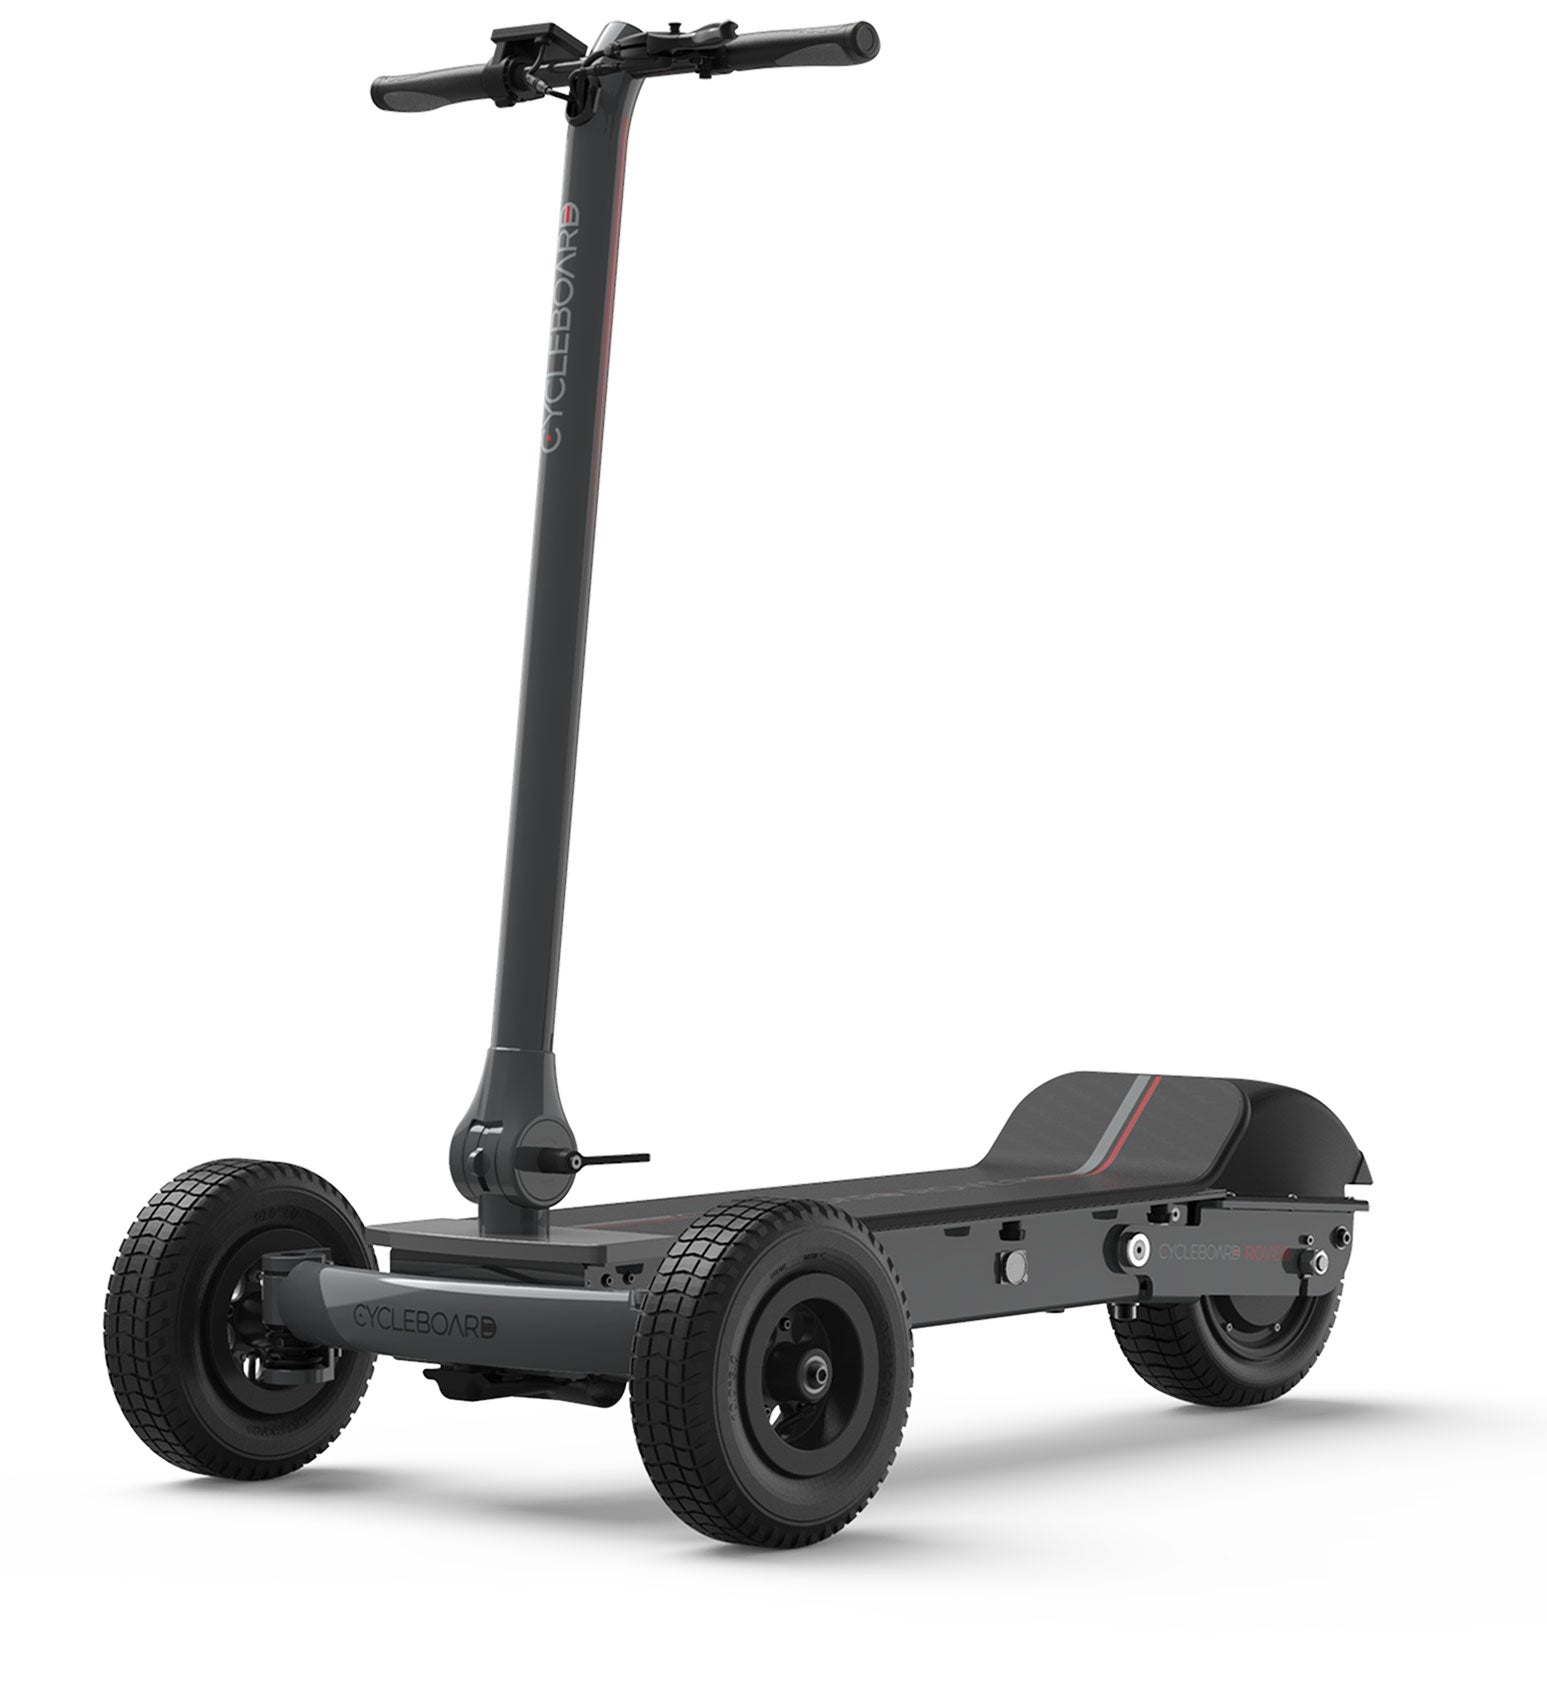 Xiaomi Scooter 4 Pro Review: Long Range, High Weight Limit, and Super  Comfortable Ride 